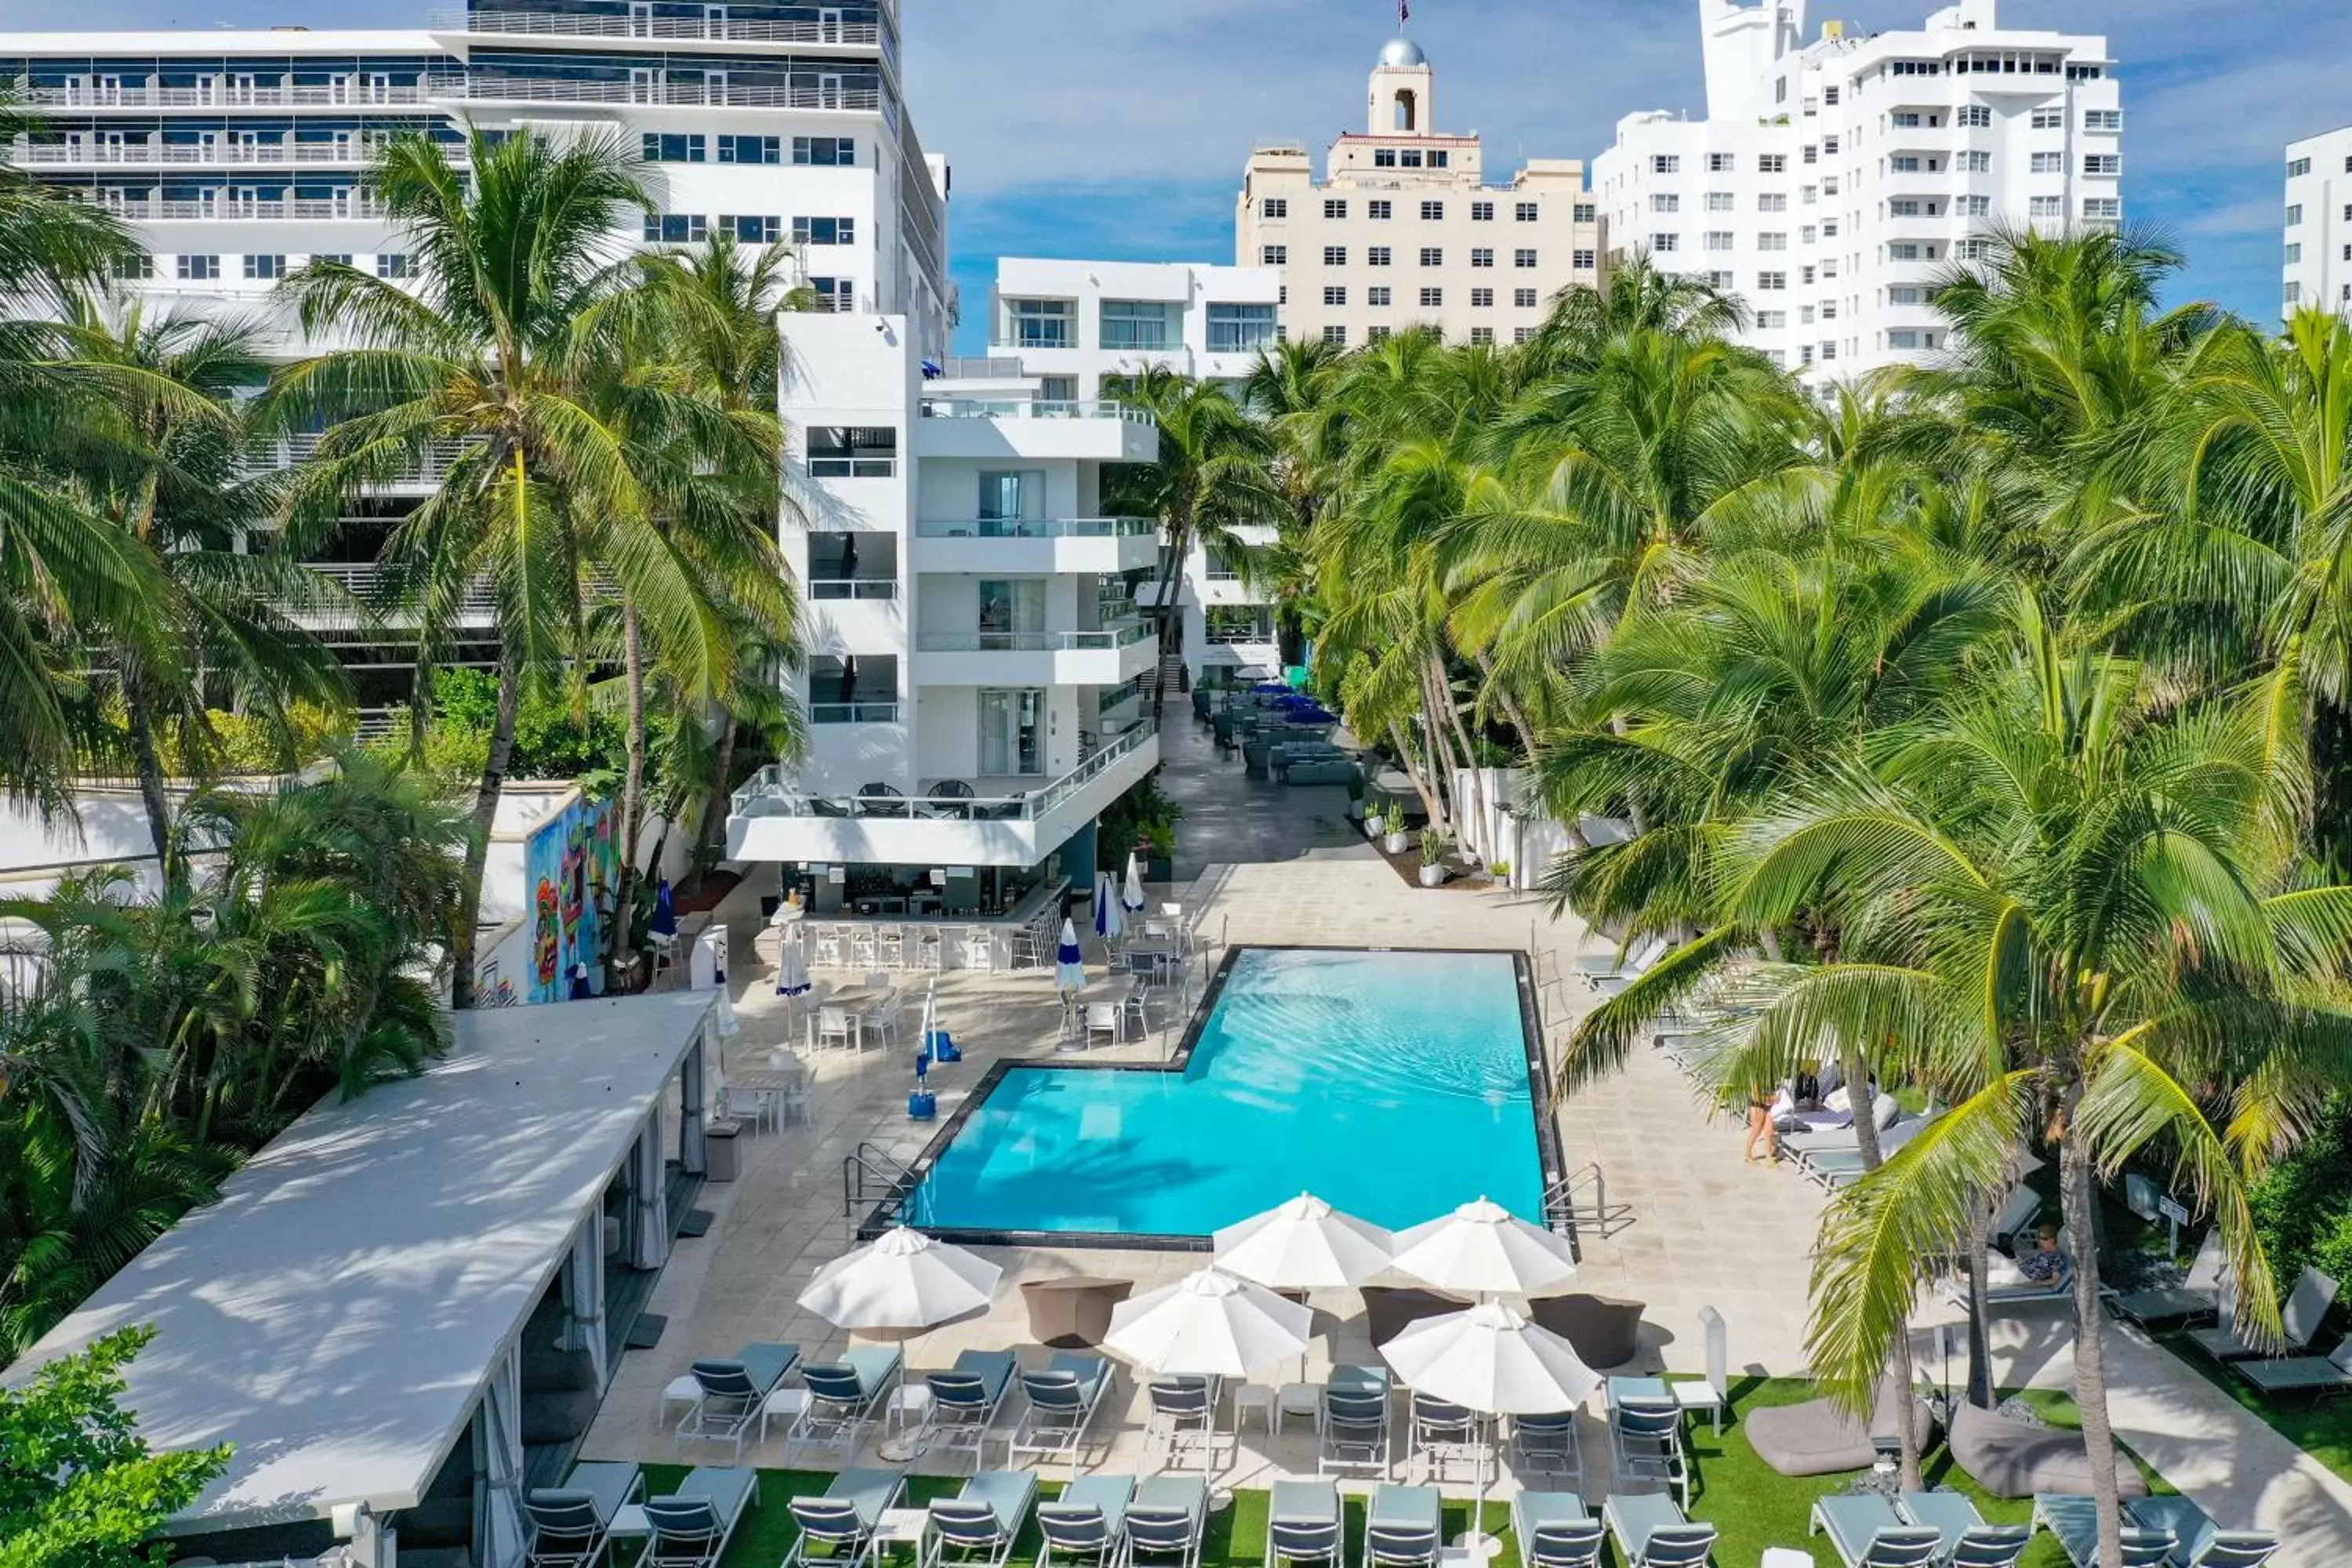 Swimming pool, Pool View in The Sagamore Hotel South Beach